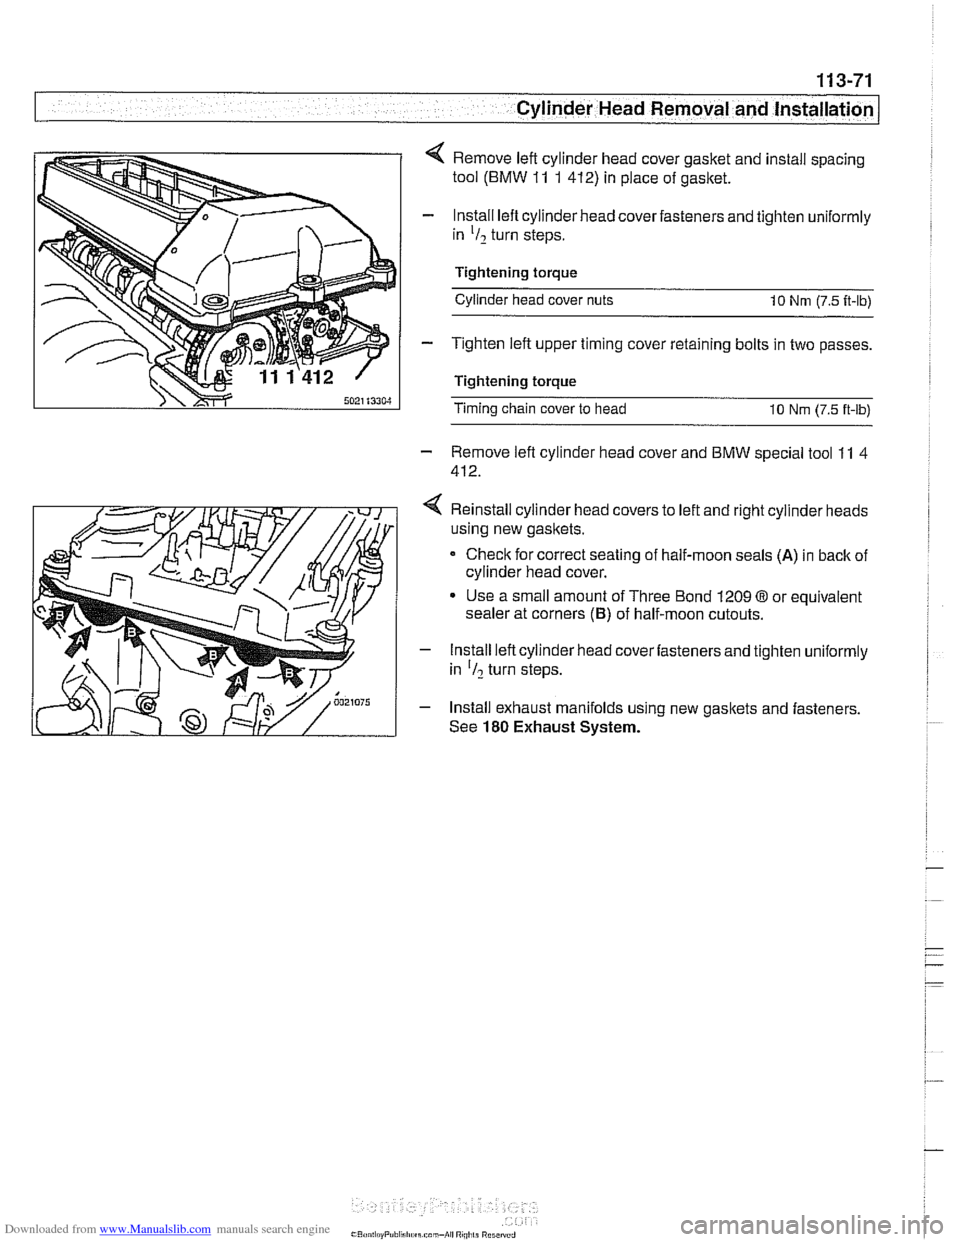 BMW 540i 1997 E39 Service Manual Downloaded from www.Manualslib.com manuals search engine 
. ." . . 
I - Cylinder Head Removal - and instard -- 
4 Remove left cylinder  head cover gasket  and install  spacing 
tool  (BMW 
11 1 412)  